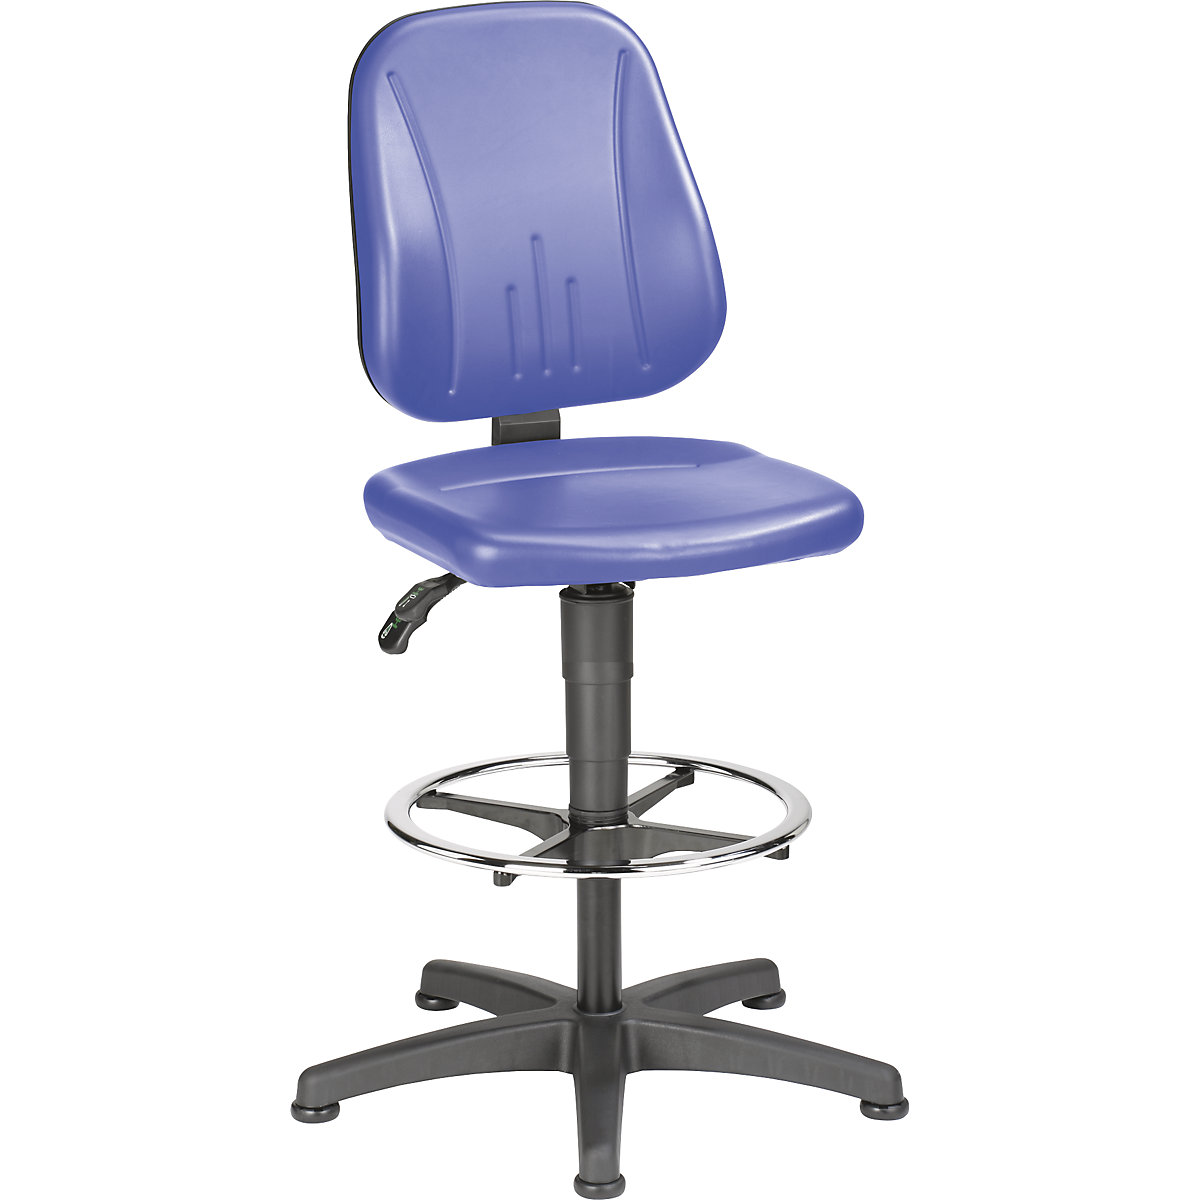 Industrial swivel chair – bimos, with gas lift height adjustment, vinyl cover, blue, with floor glides and foot ring-5